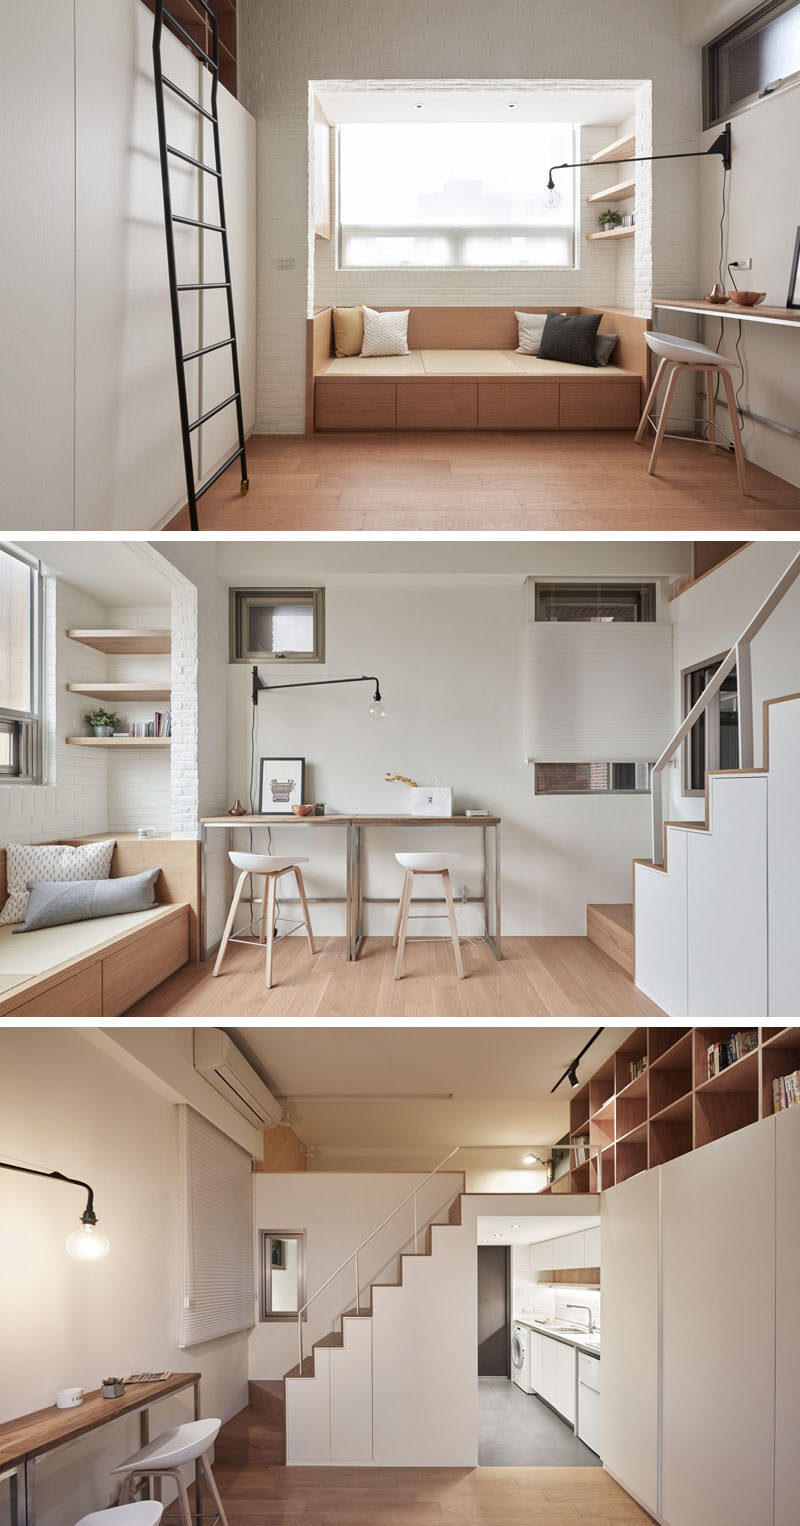 This Small Loft Apartment Is Designed To Include Everything